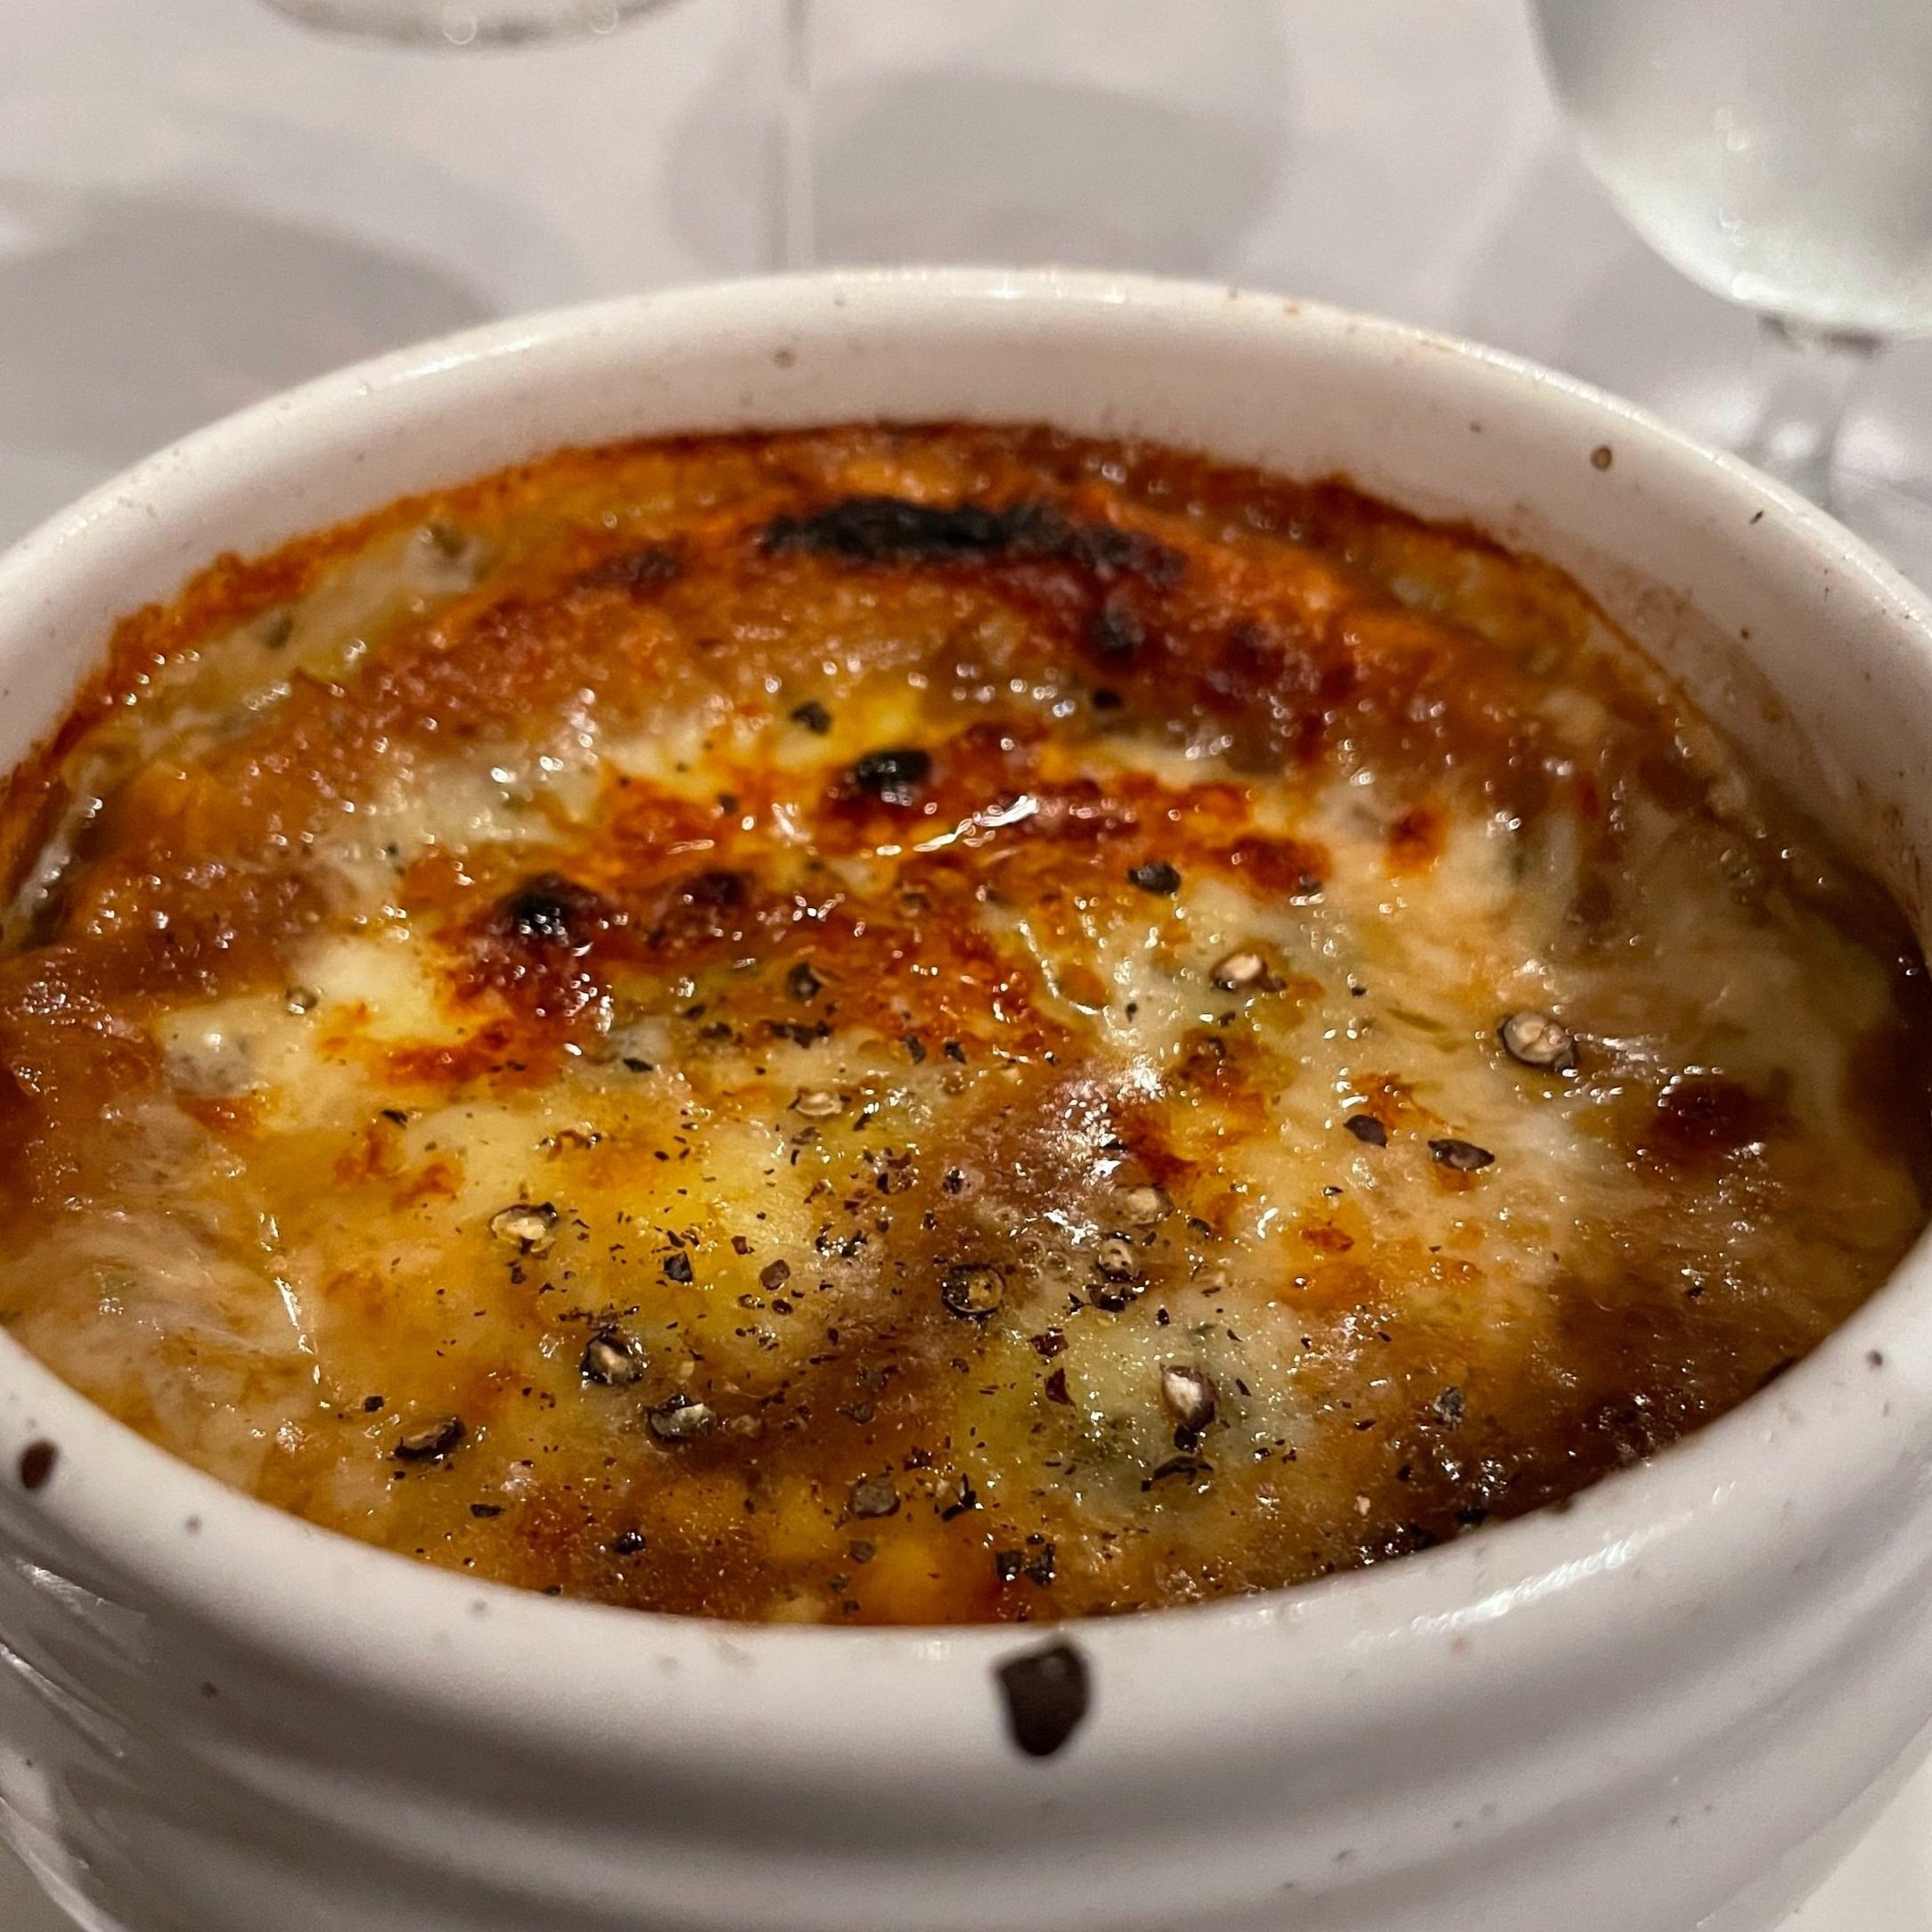 The black and blue onion soup